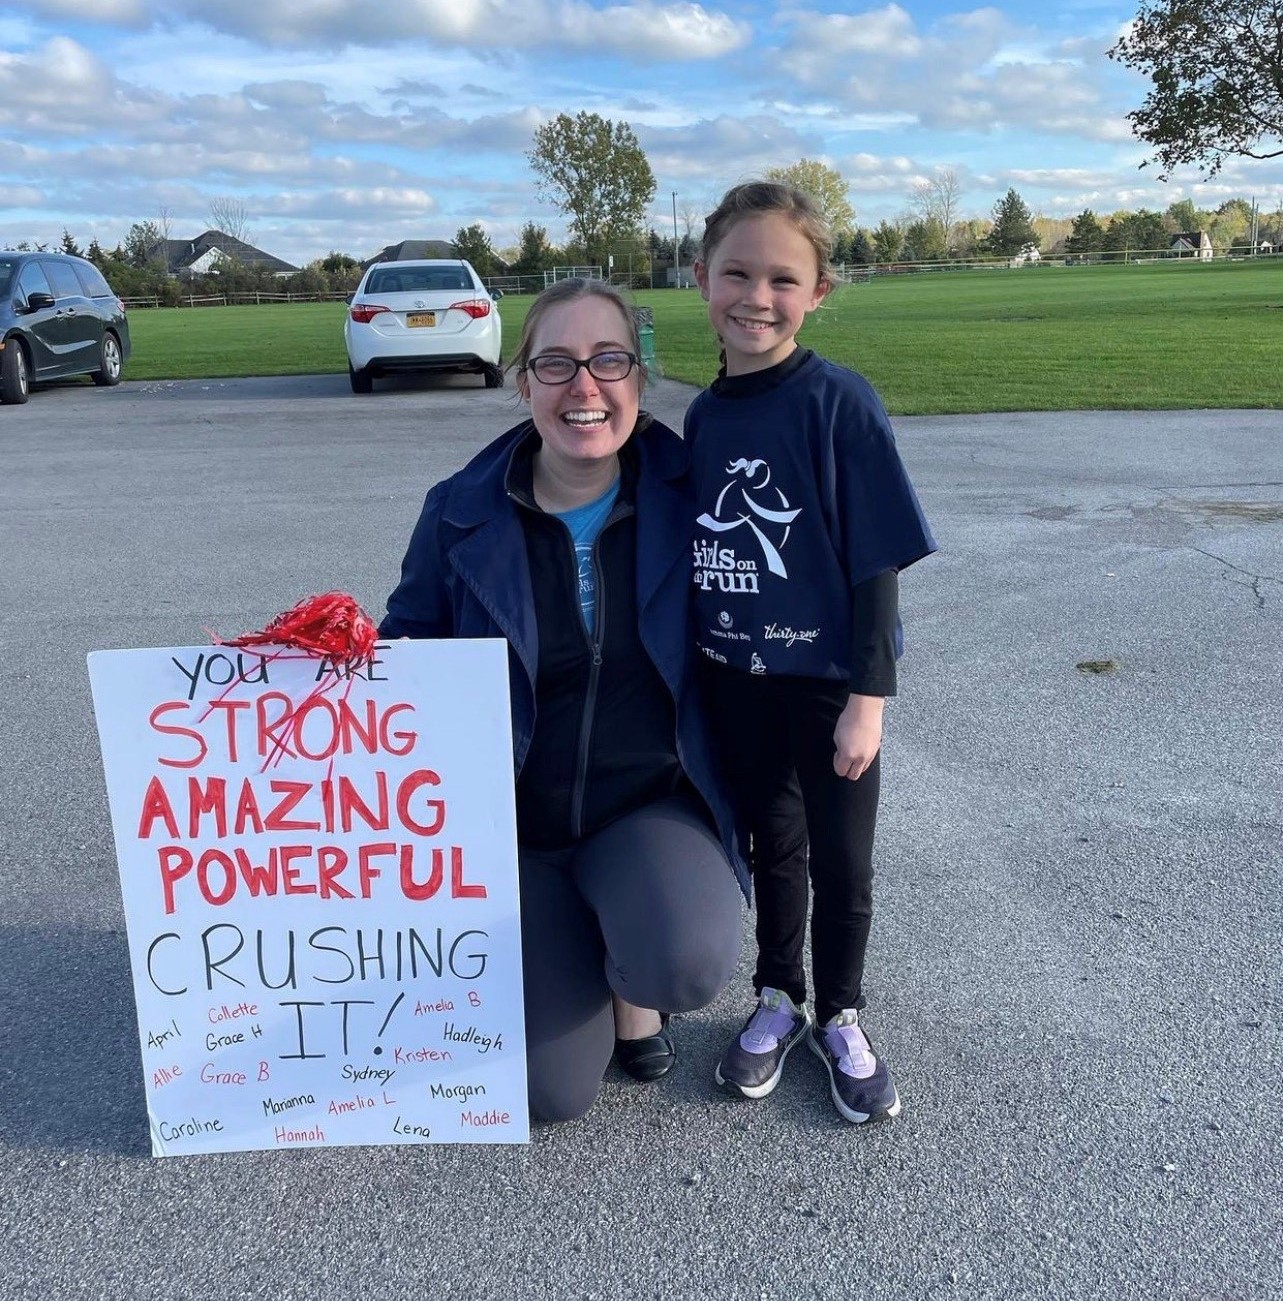 Smiling coach with glasses and smiling girl pose with a fantastic 5K sign that says you are strong, amazing, powerful, crushing it!